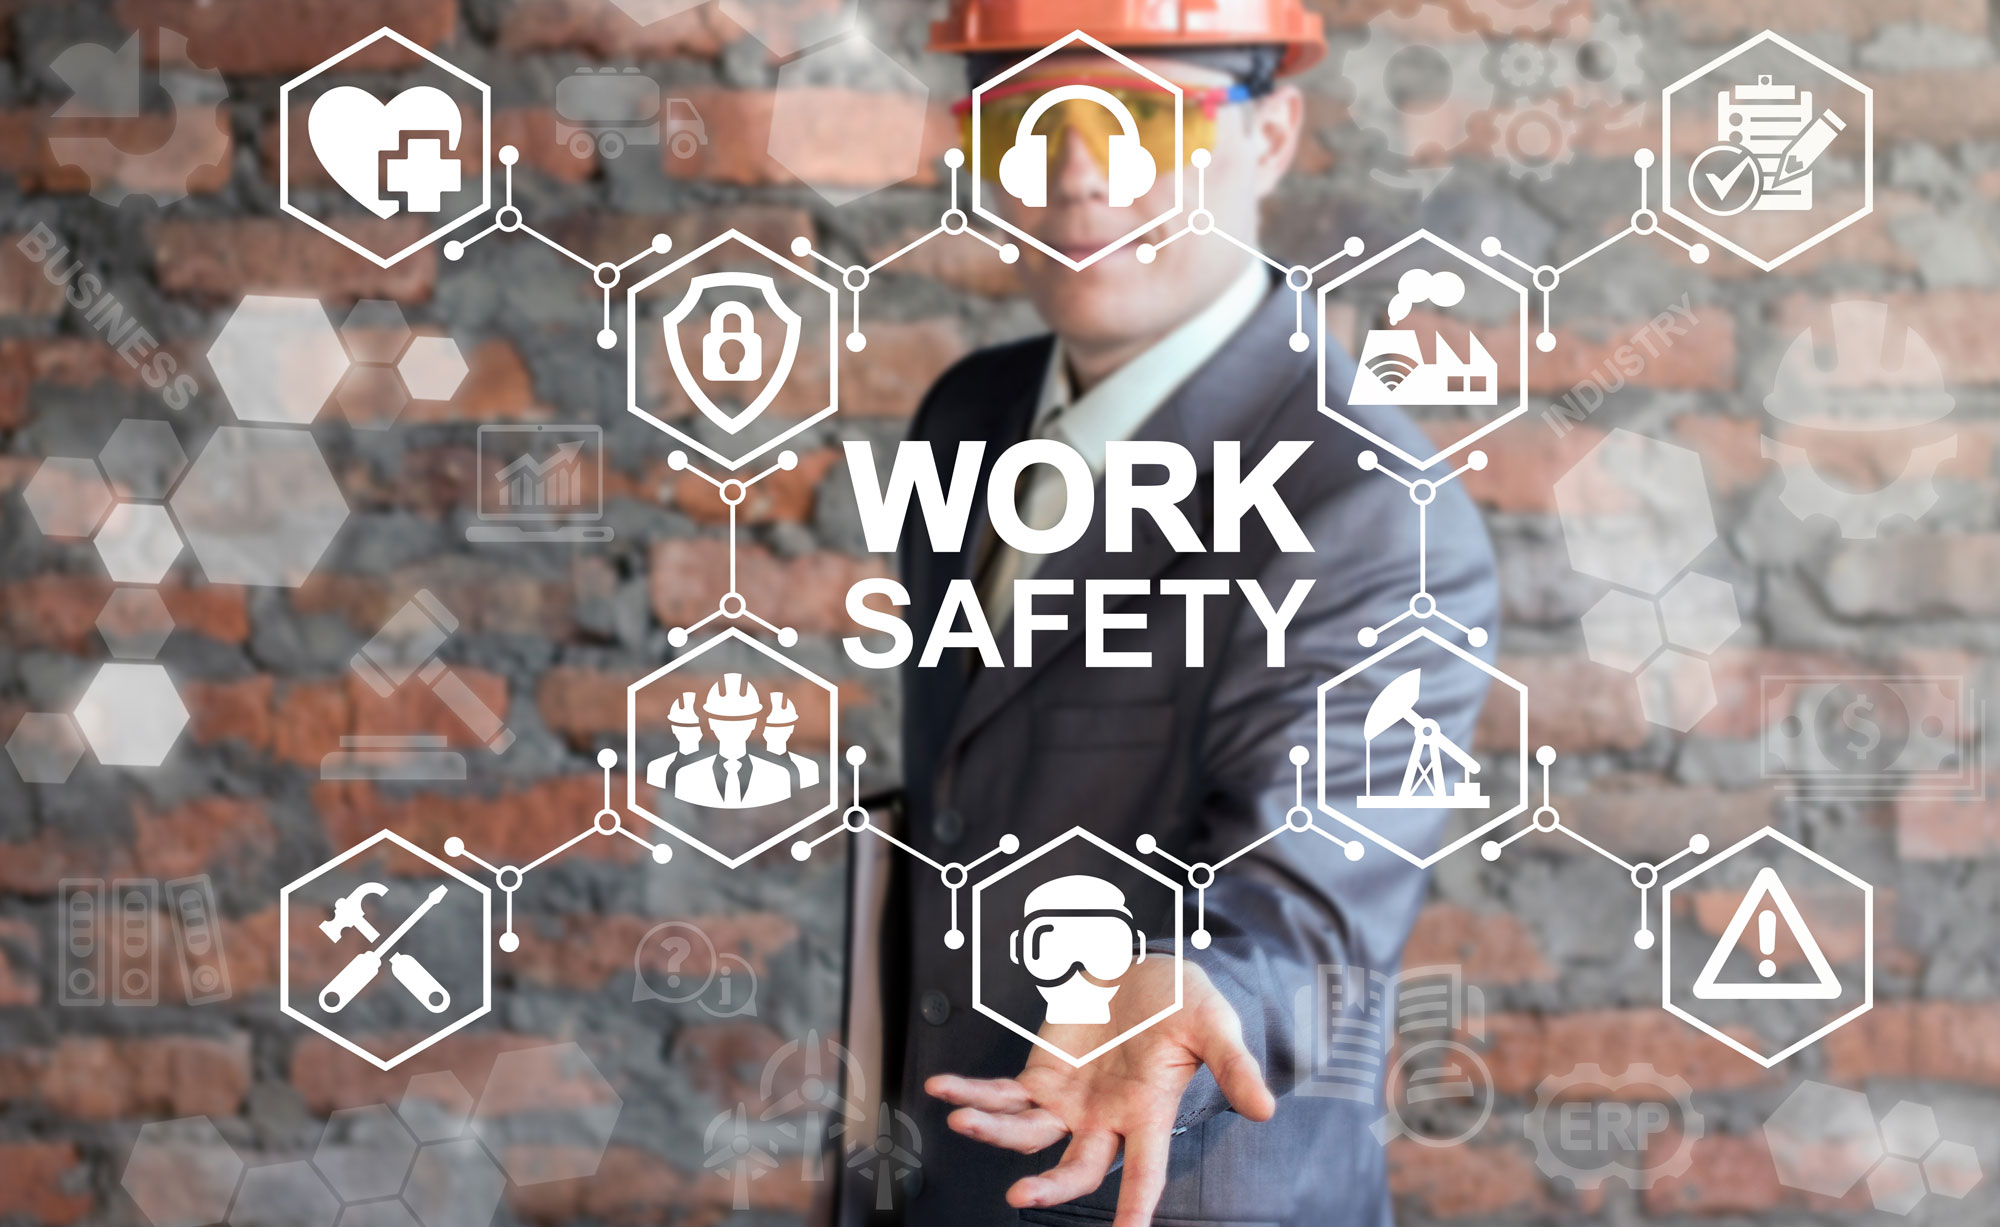 History Of Workplace Safety